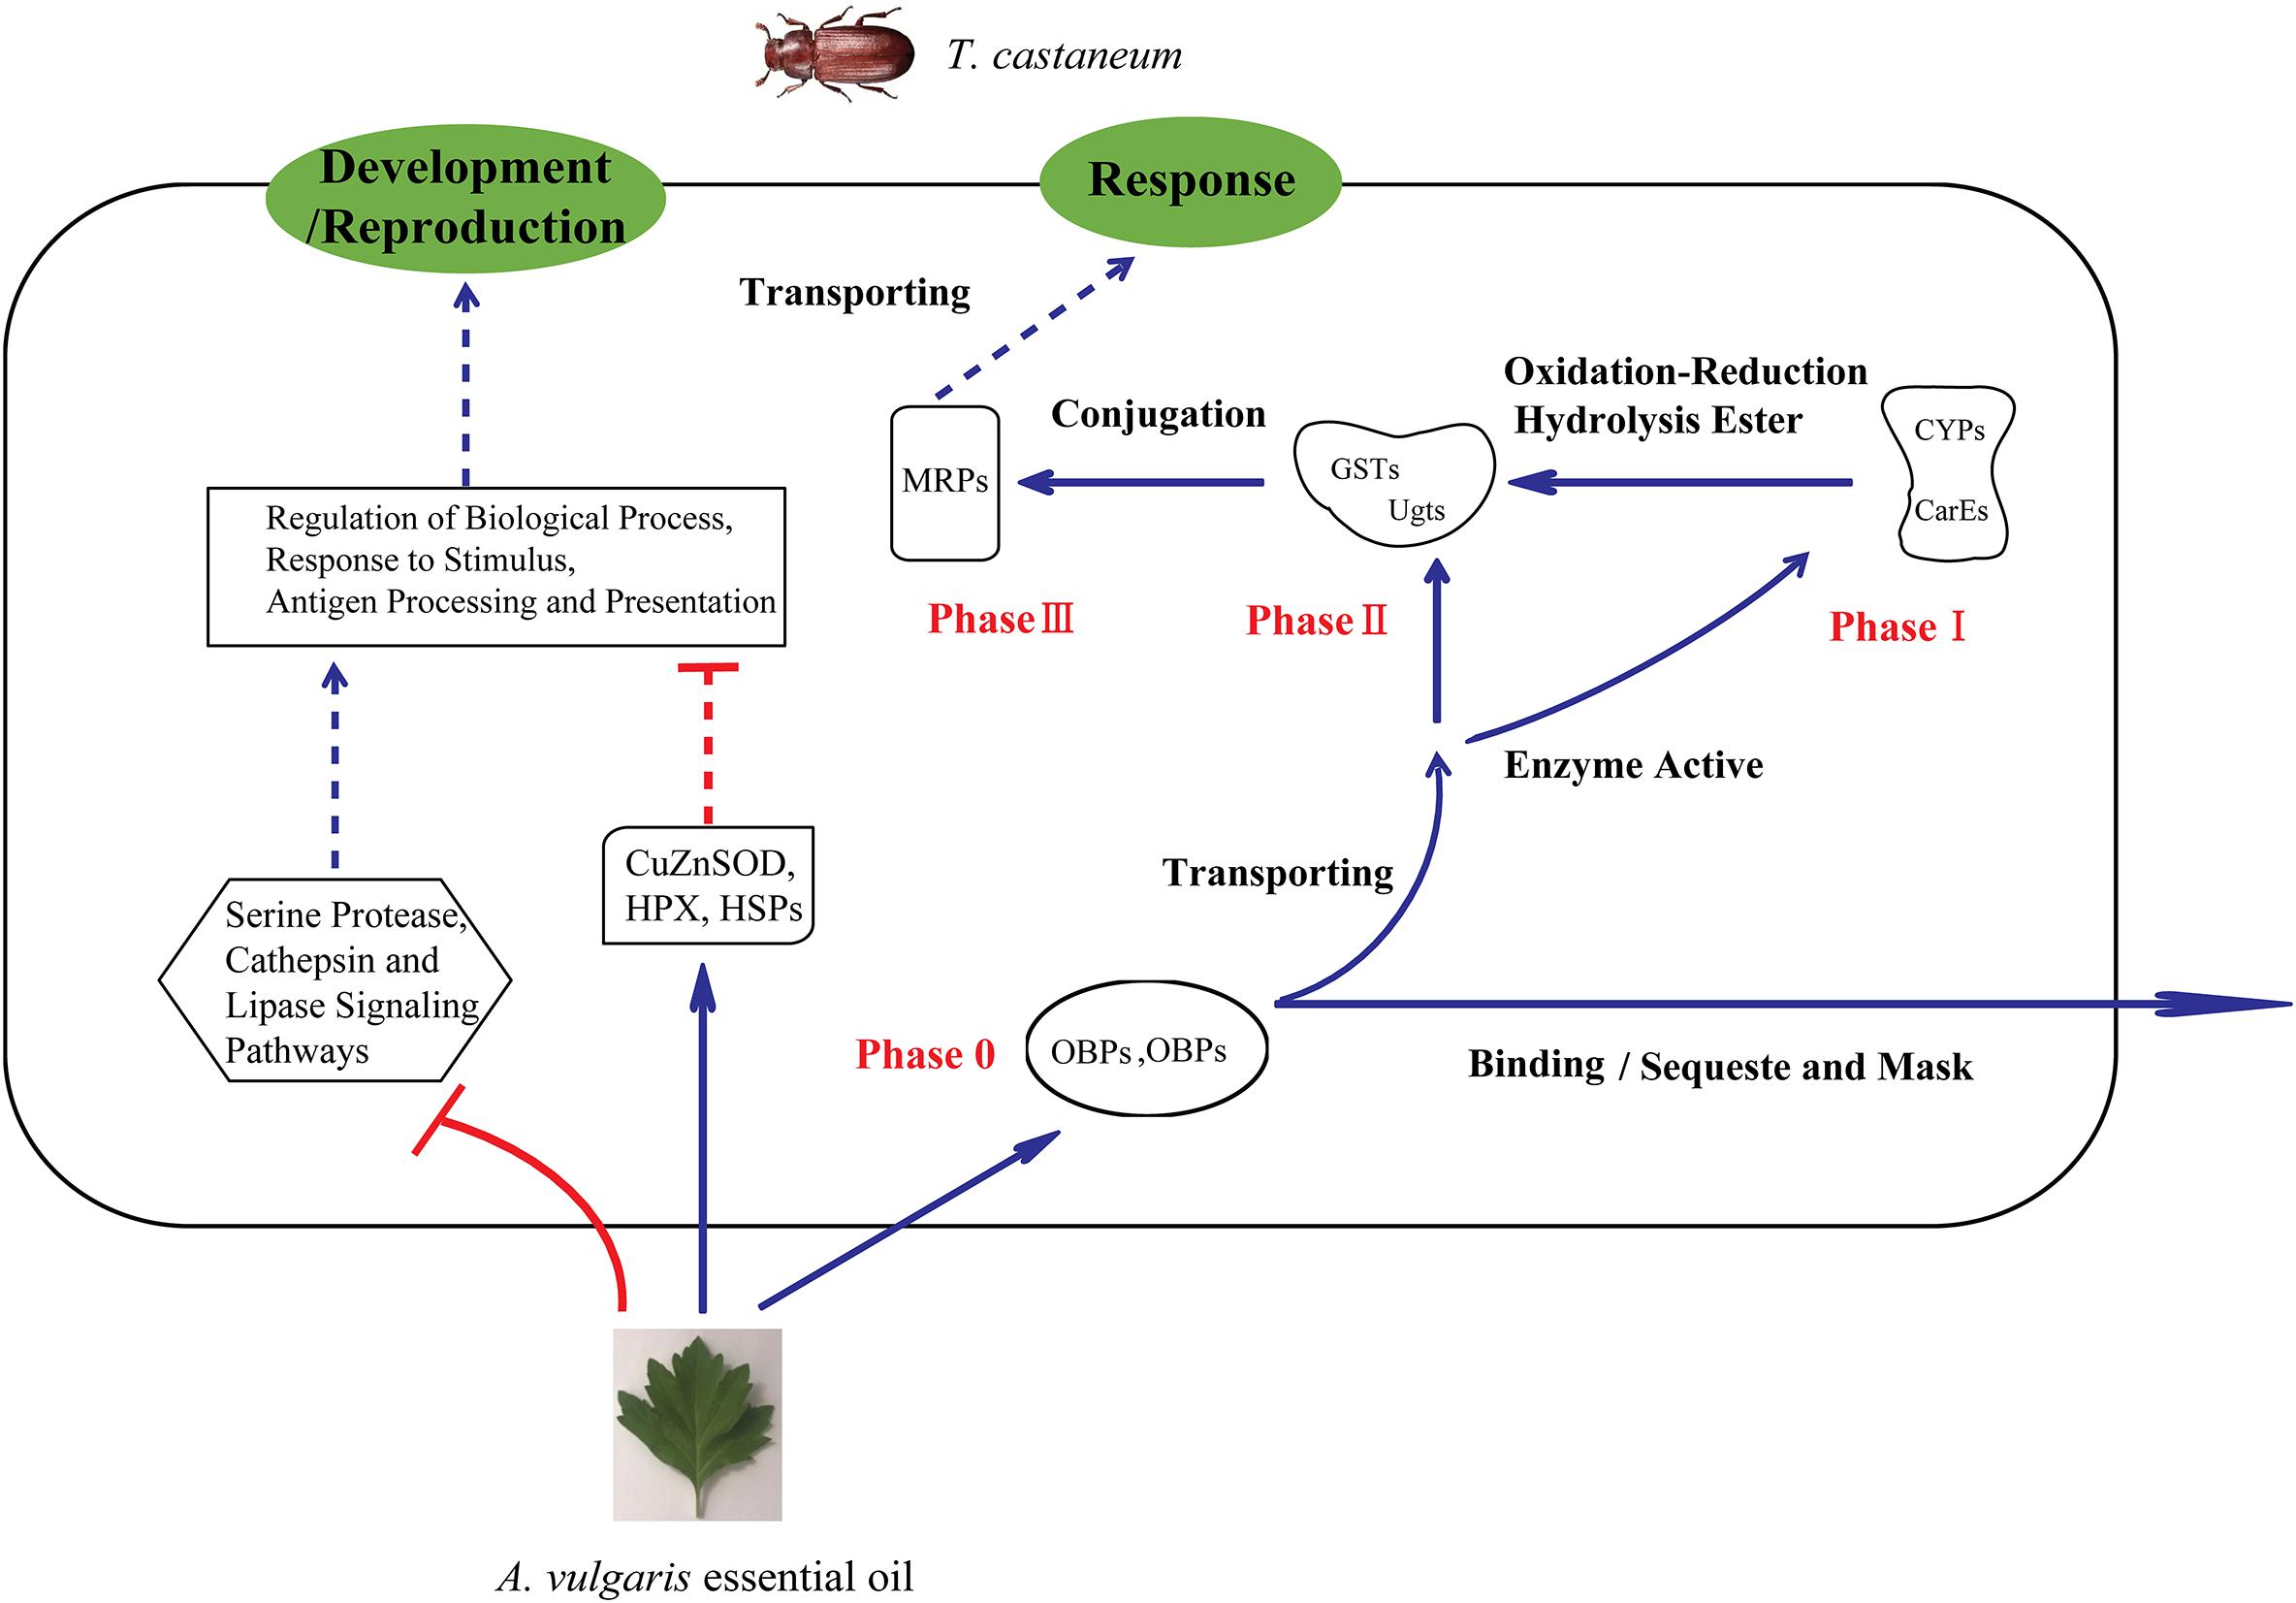 Ovicidal and repellent activities of several plant essential oils against  Periplaneta americana L. and enhanced activities from their combined  formulation